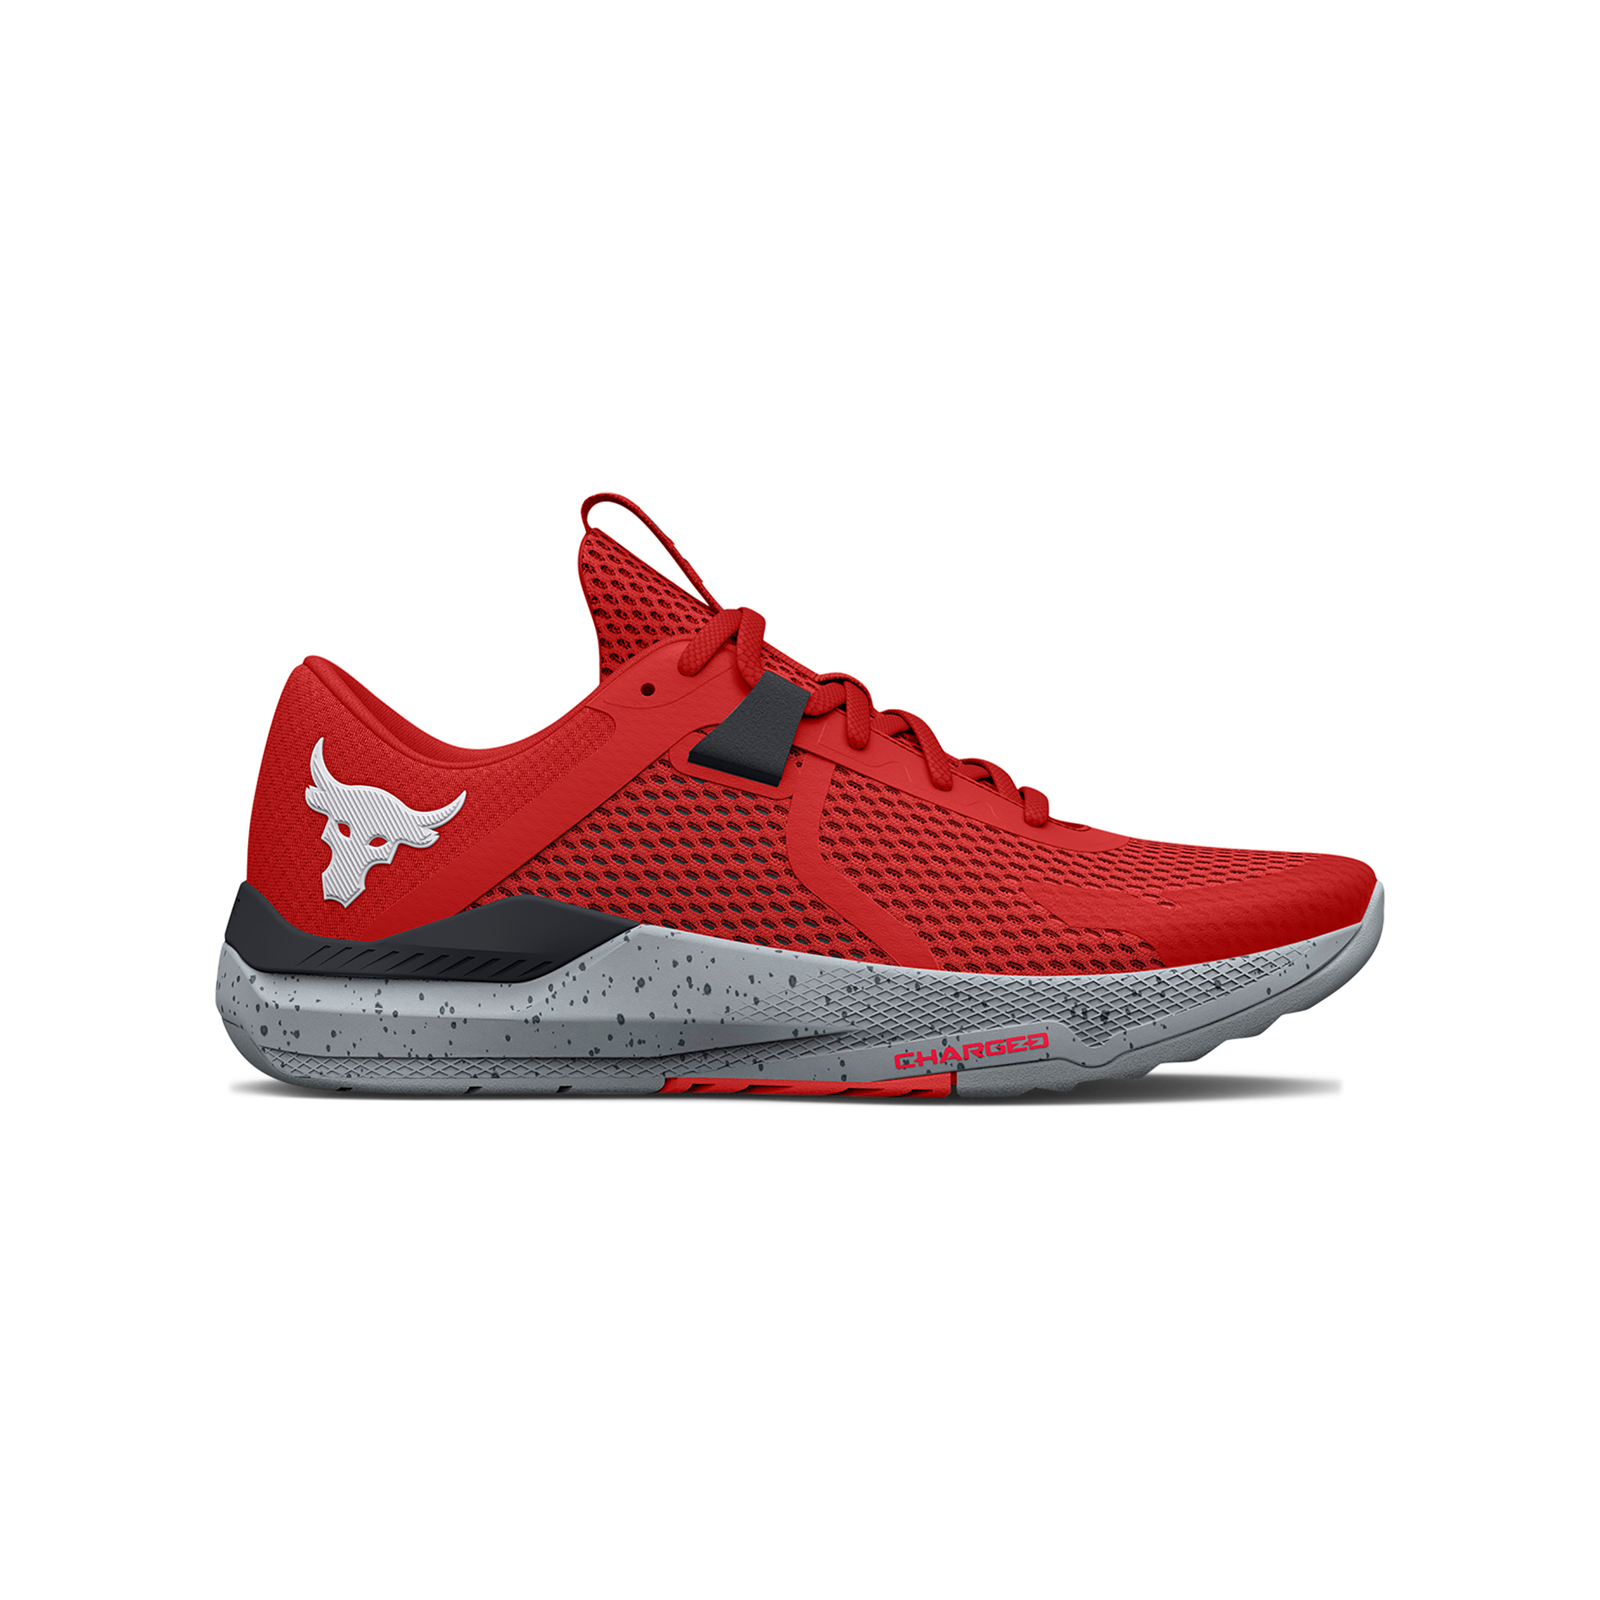 Under Armour - 3025081 PROJECT ROCK BSR 2 - 601/47G4 Ανδρικά > Παπούτσια > Αθλητικά > Παπούτσι Low Cut